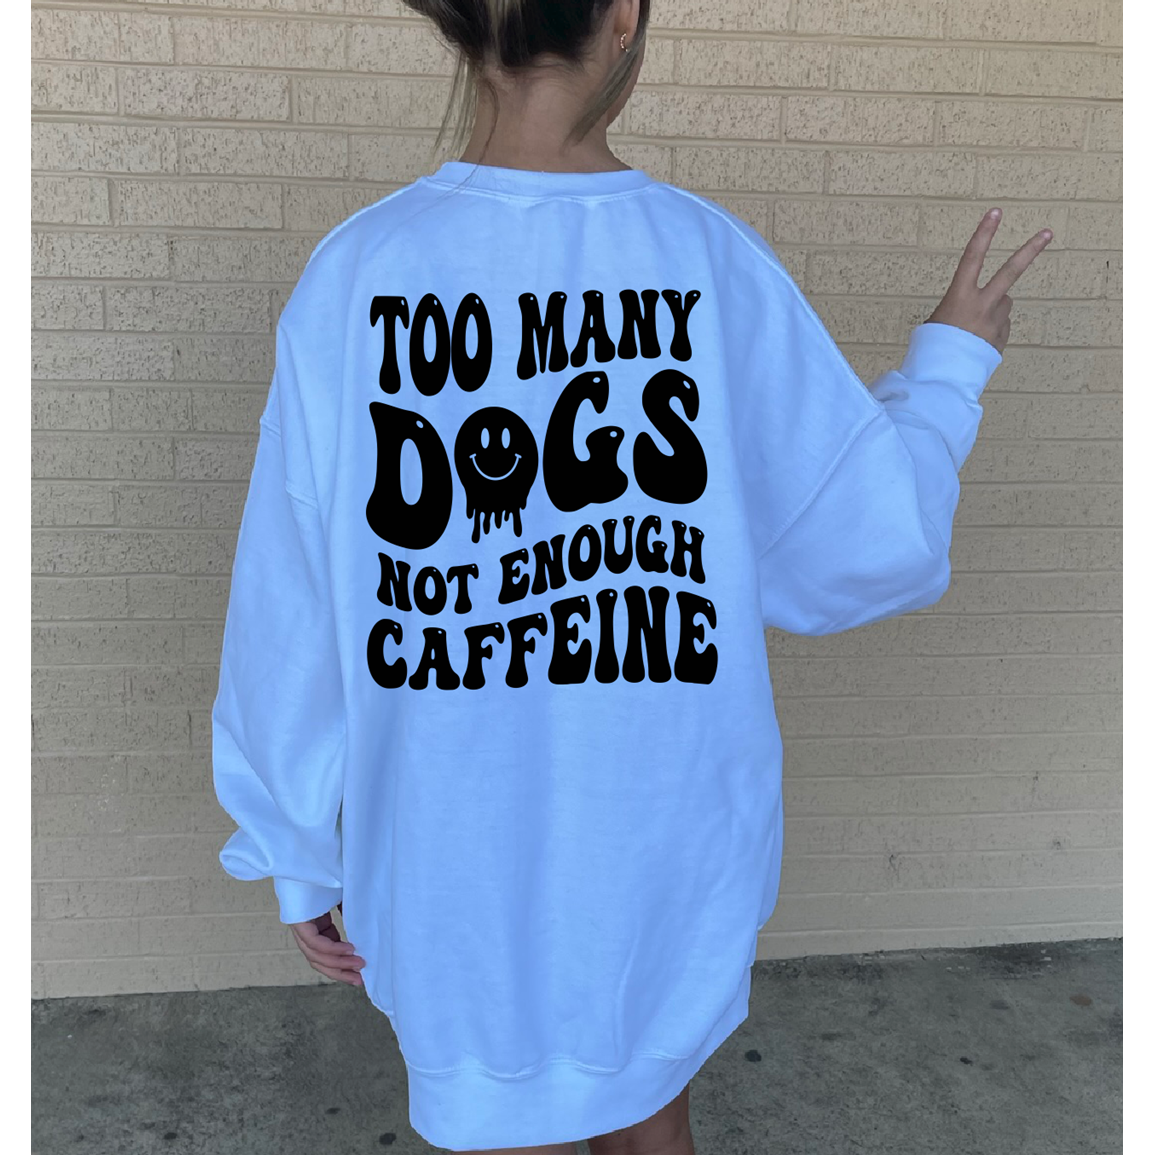 Too Many Dogs not enough caffeine tee or sweatshirt